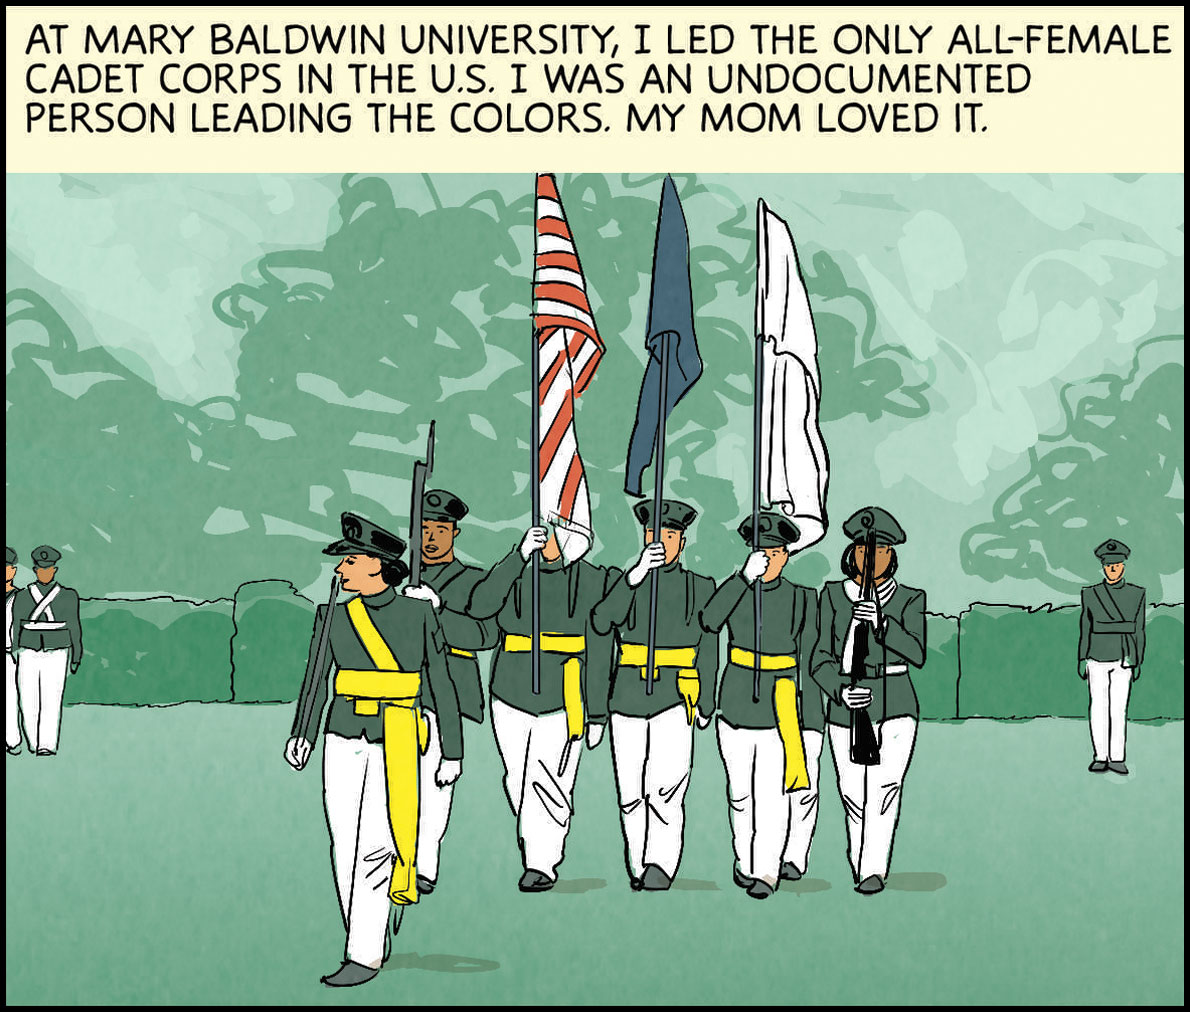 At Mary Baldwin University, I led the only all-female cadet corps in the U.S. I was an undocumented person leading the colors. My mom loved it.